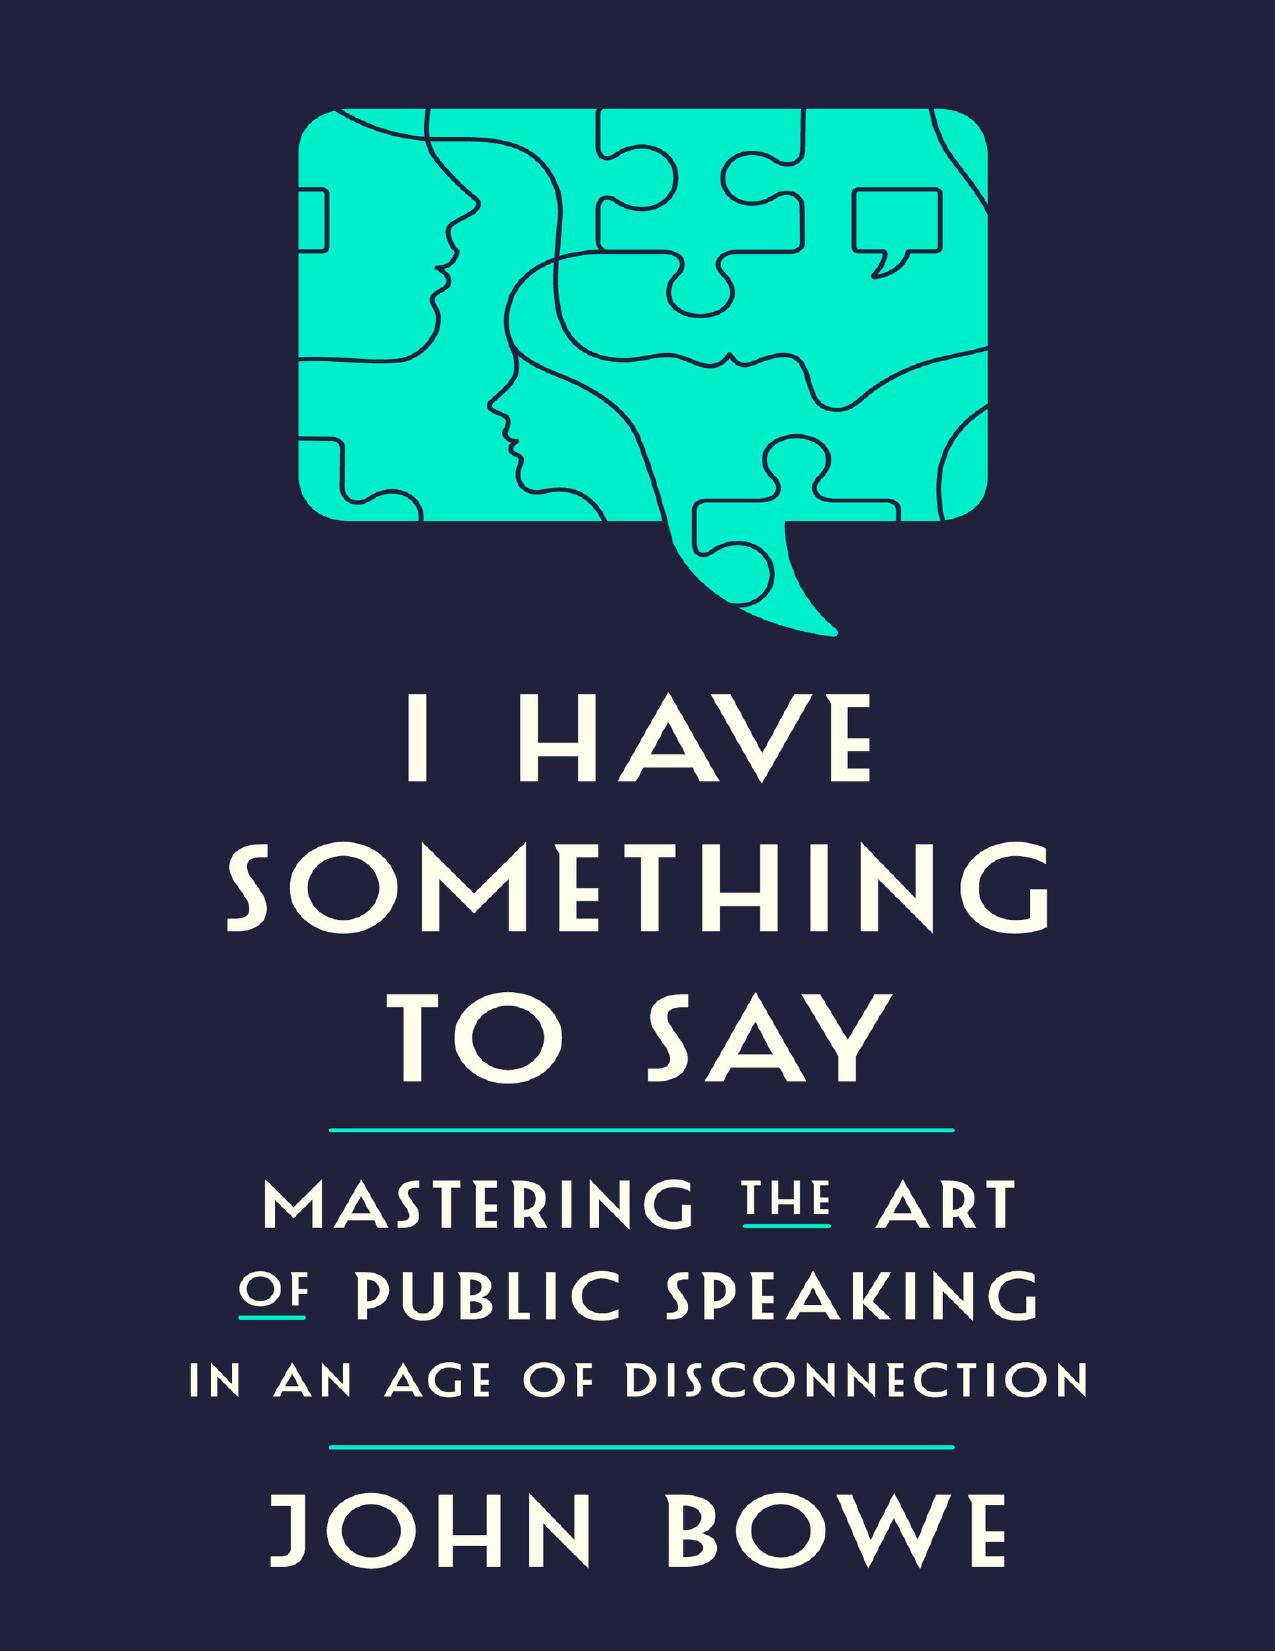 I Have Something to Say: Mastering the Art of Public Speaking in an Age of Disconnection by John Bowe